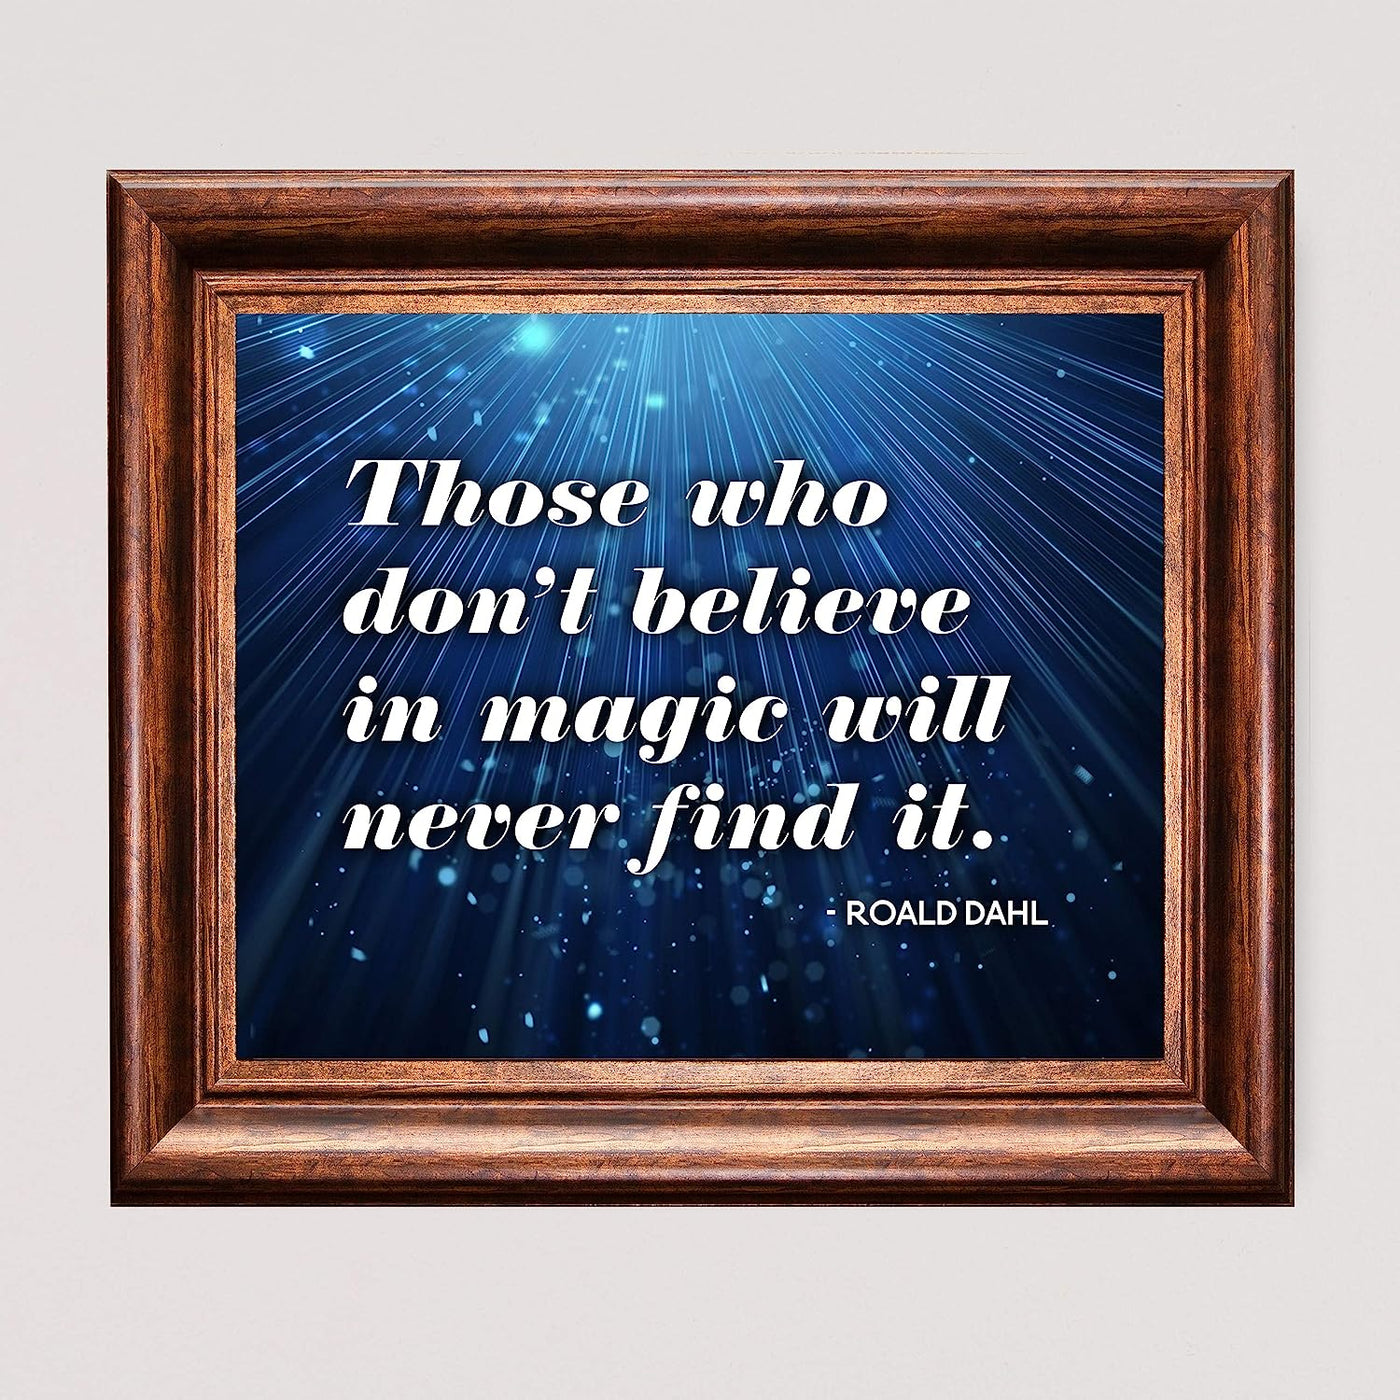 Roald Dahl Quotes-?Those Who Don't Believe In Magic-Never Find It? Inspirational Wall Art -10 x 8" Typographic Poster Print-Ready to Frame. Home-Office-School-Dorm-Library Decor. Great Literary Gift!